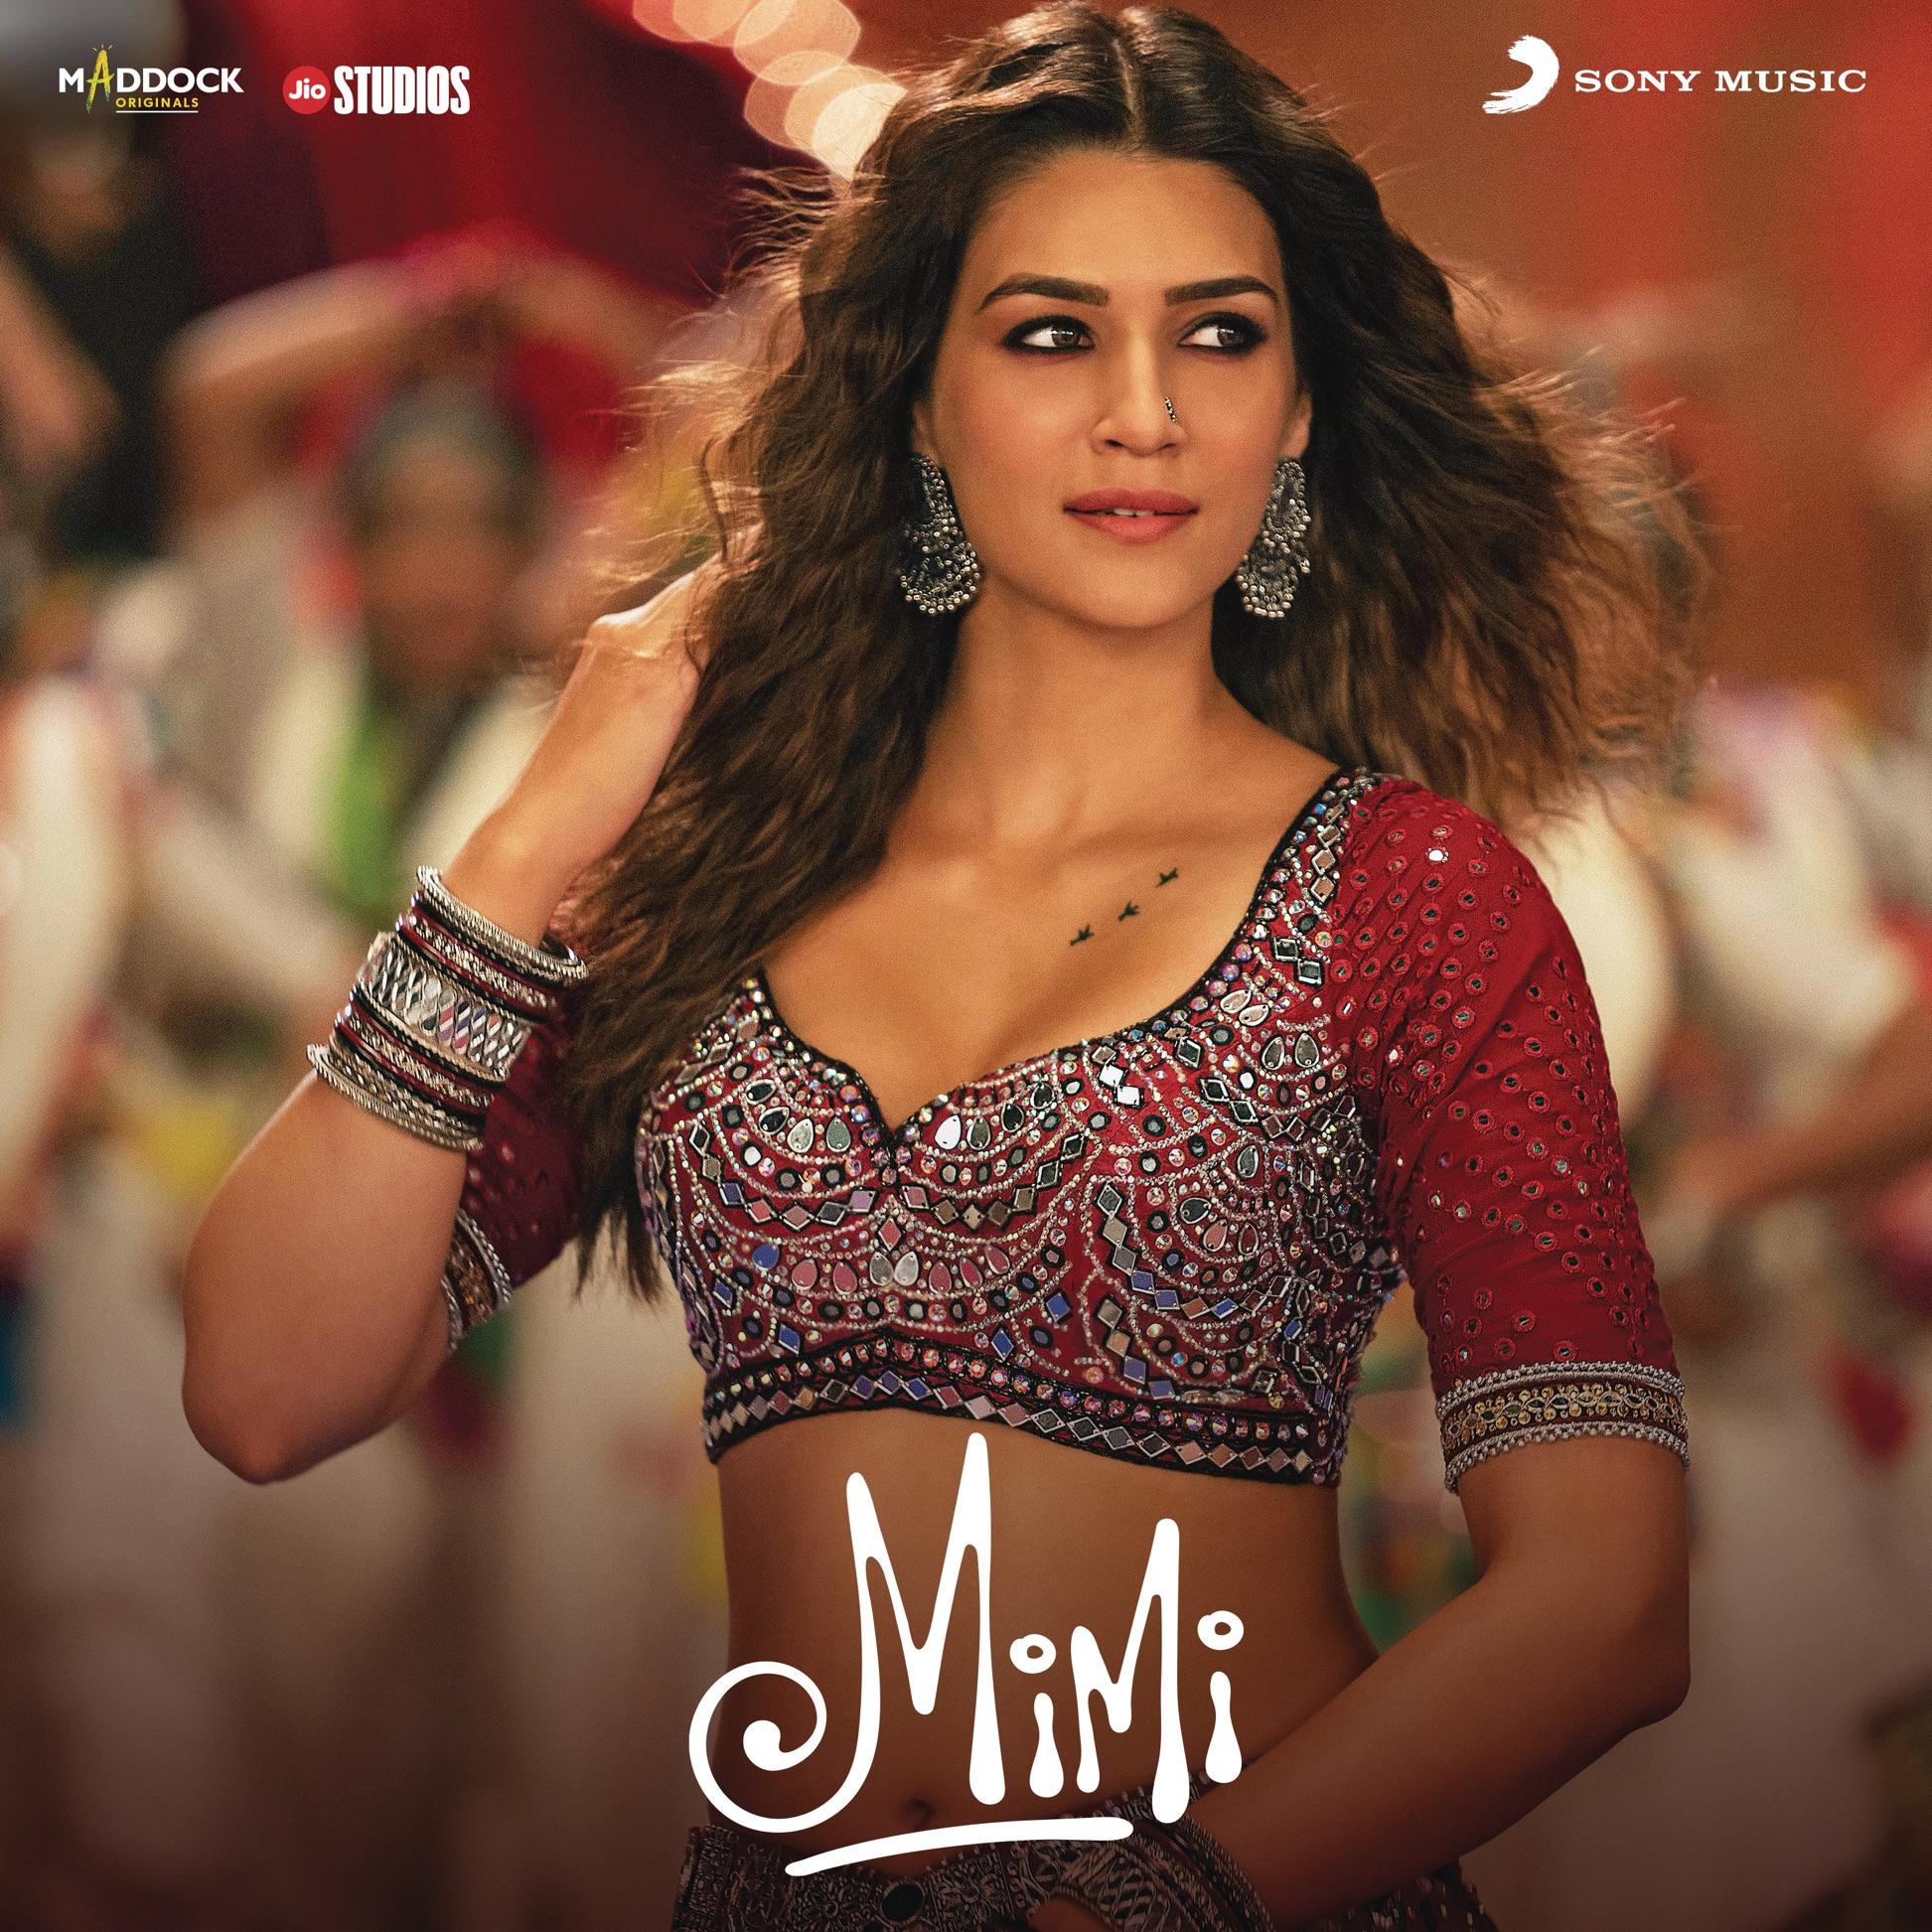 Mimi (2021) delves into the emotional depths as Kriti Sanon portrays a surrogate mother, navigating the complexities of motherhood, sacrifice, and dreams.